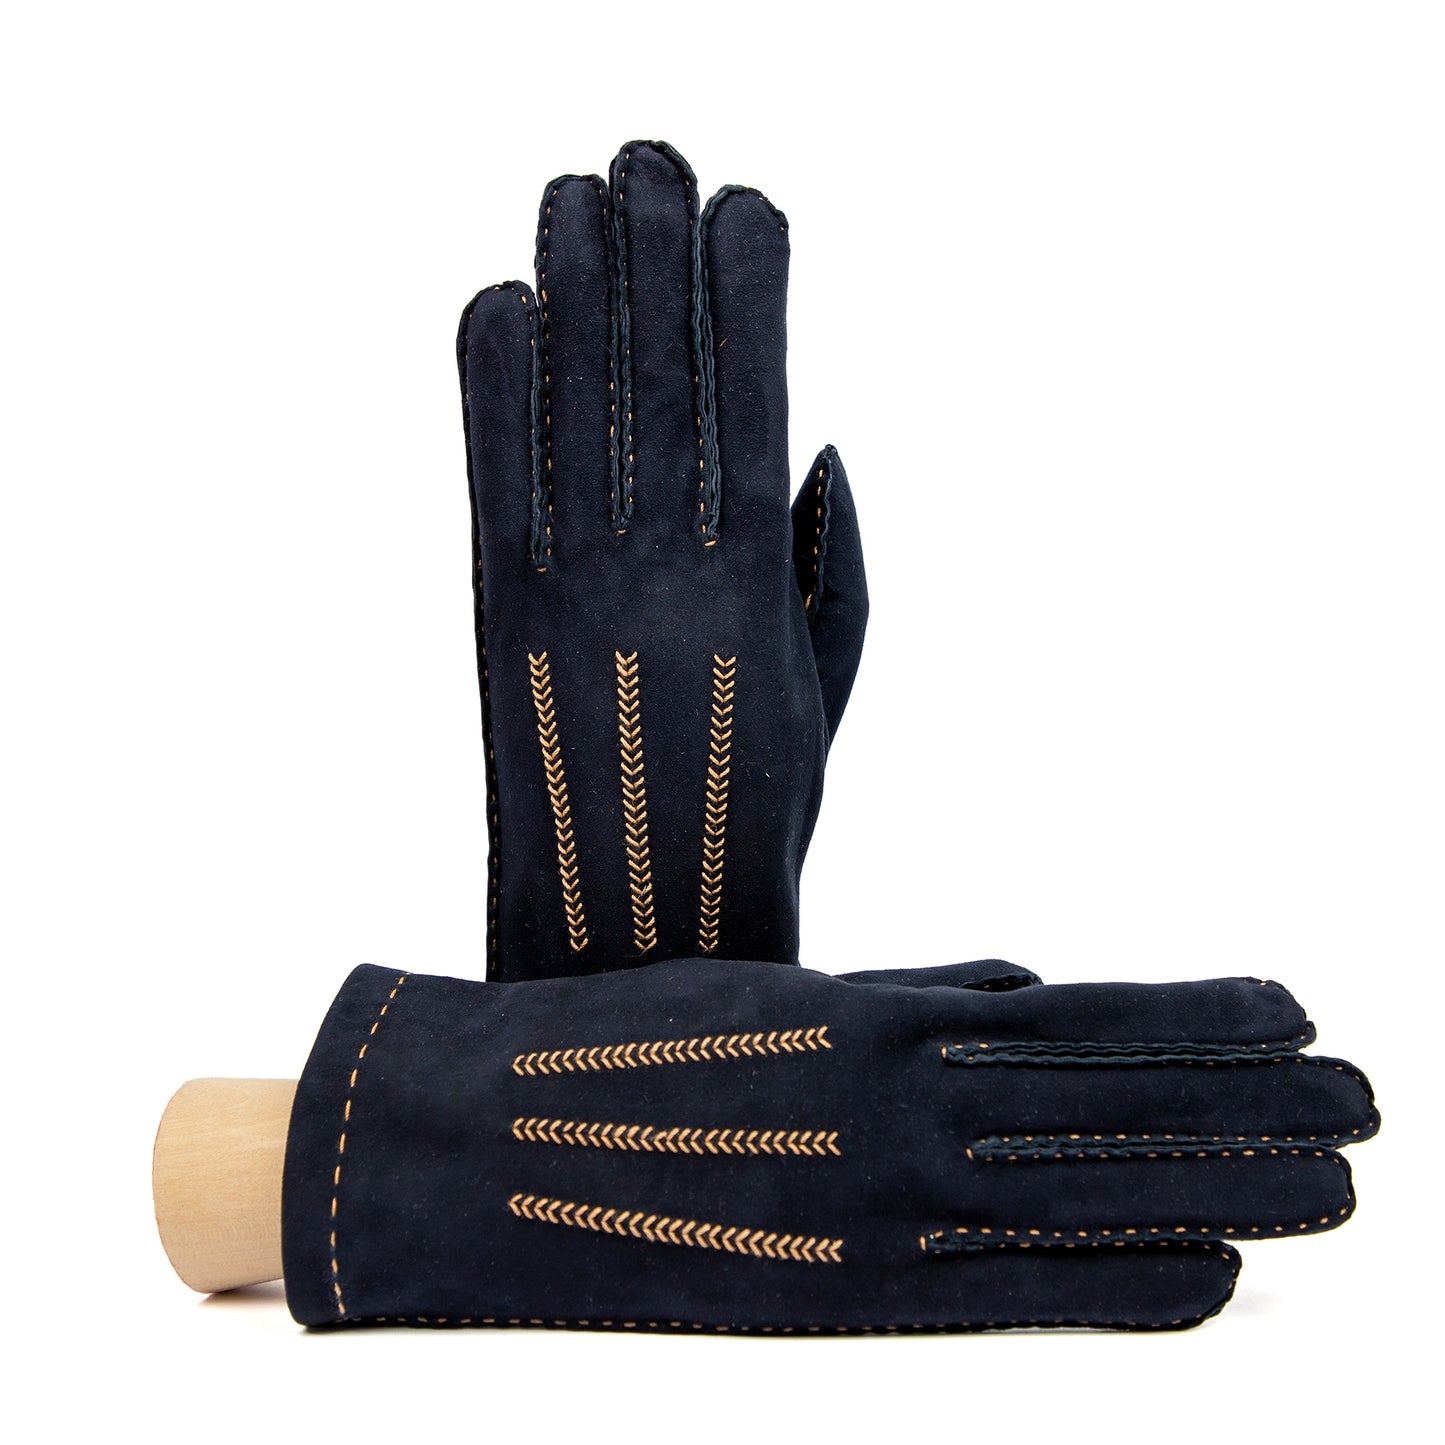 Women's classic blue suede leather gloves entirely hand-sewn with cashmere lining